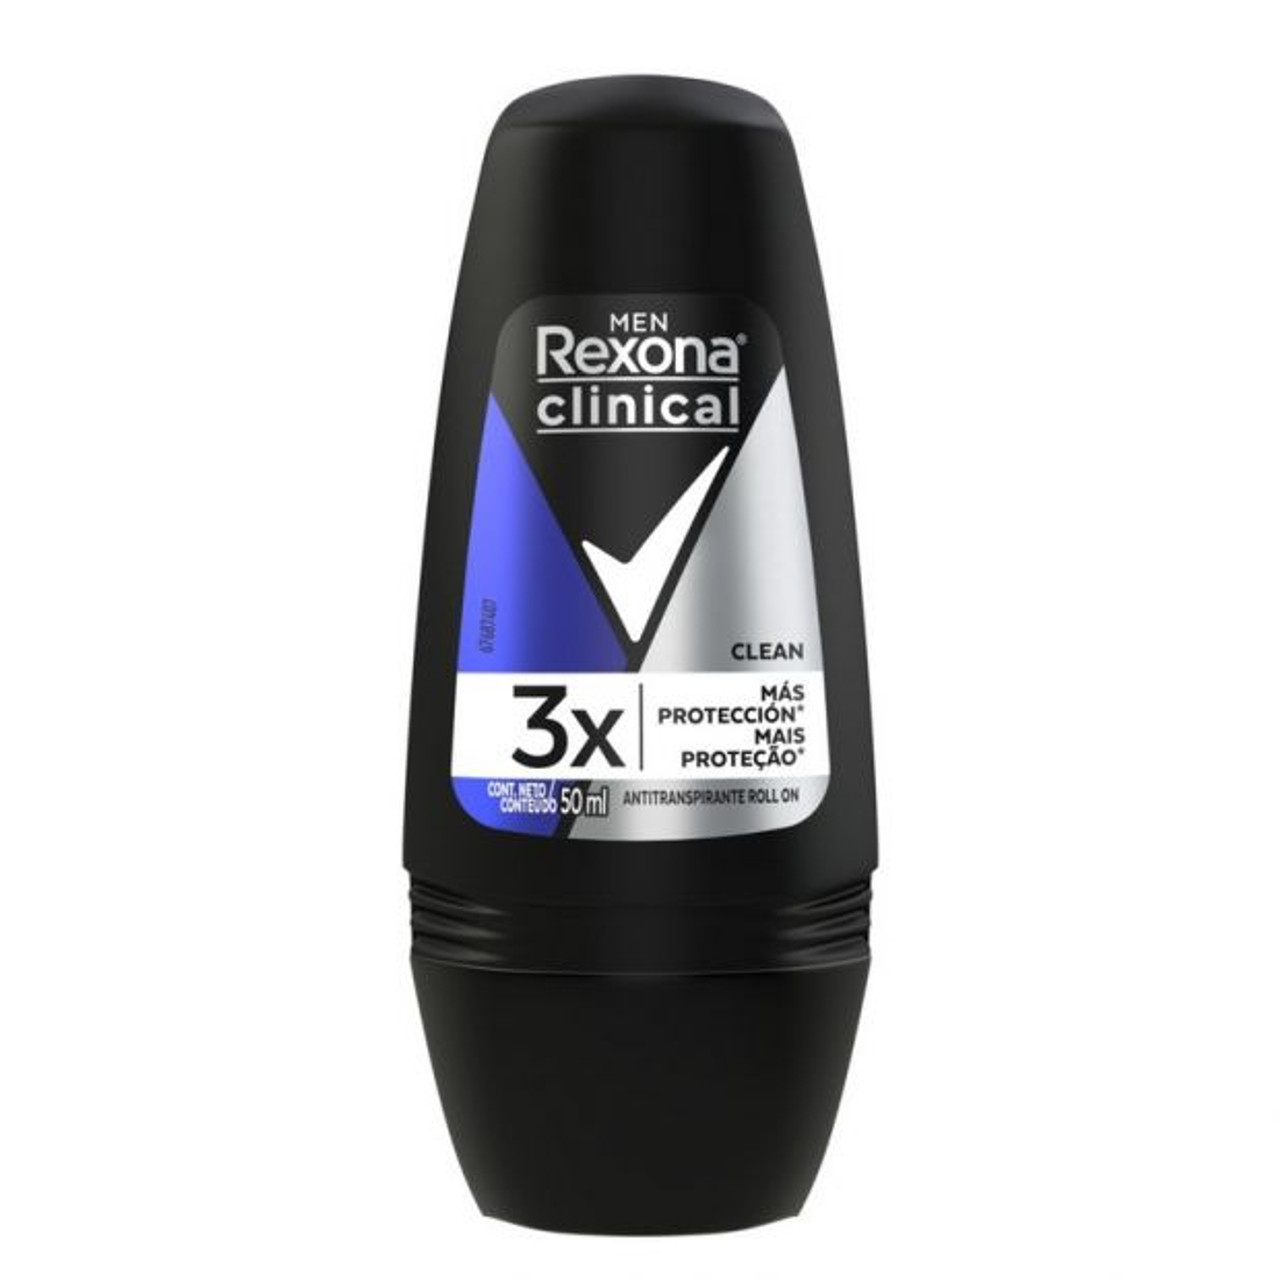 Rexona Clinical Clean Roll On 3x More Protection 96 Hour